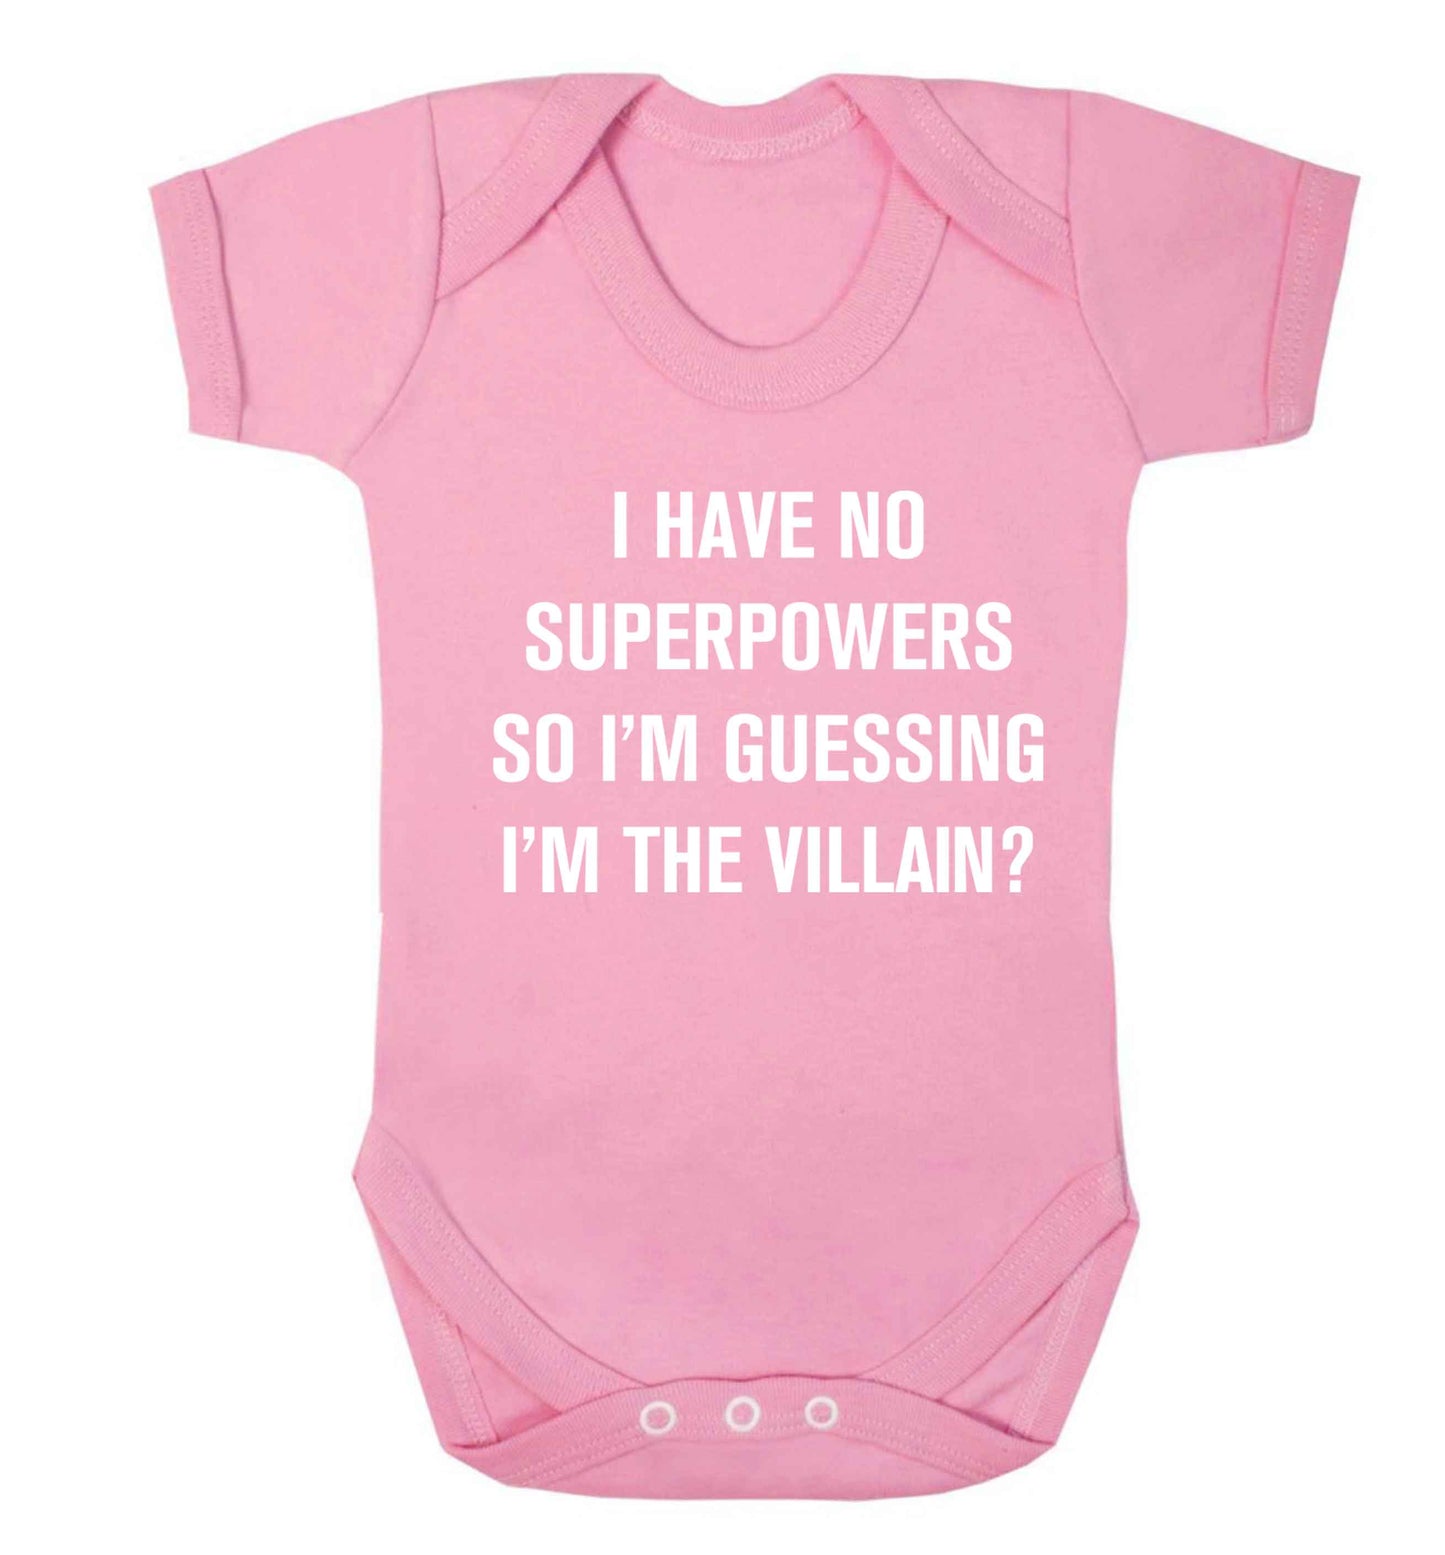 I have no superpowers so I'm guessing I'm the villain? Baby Vest pale pink 18-24 months